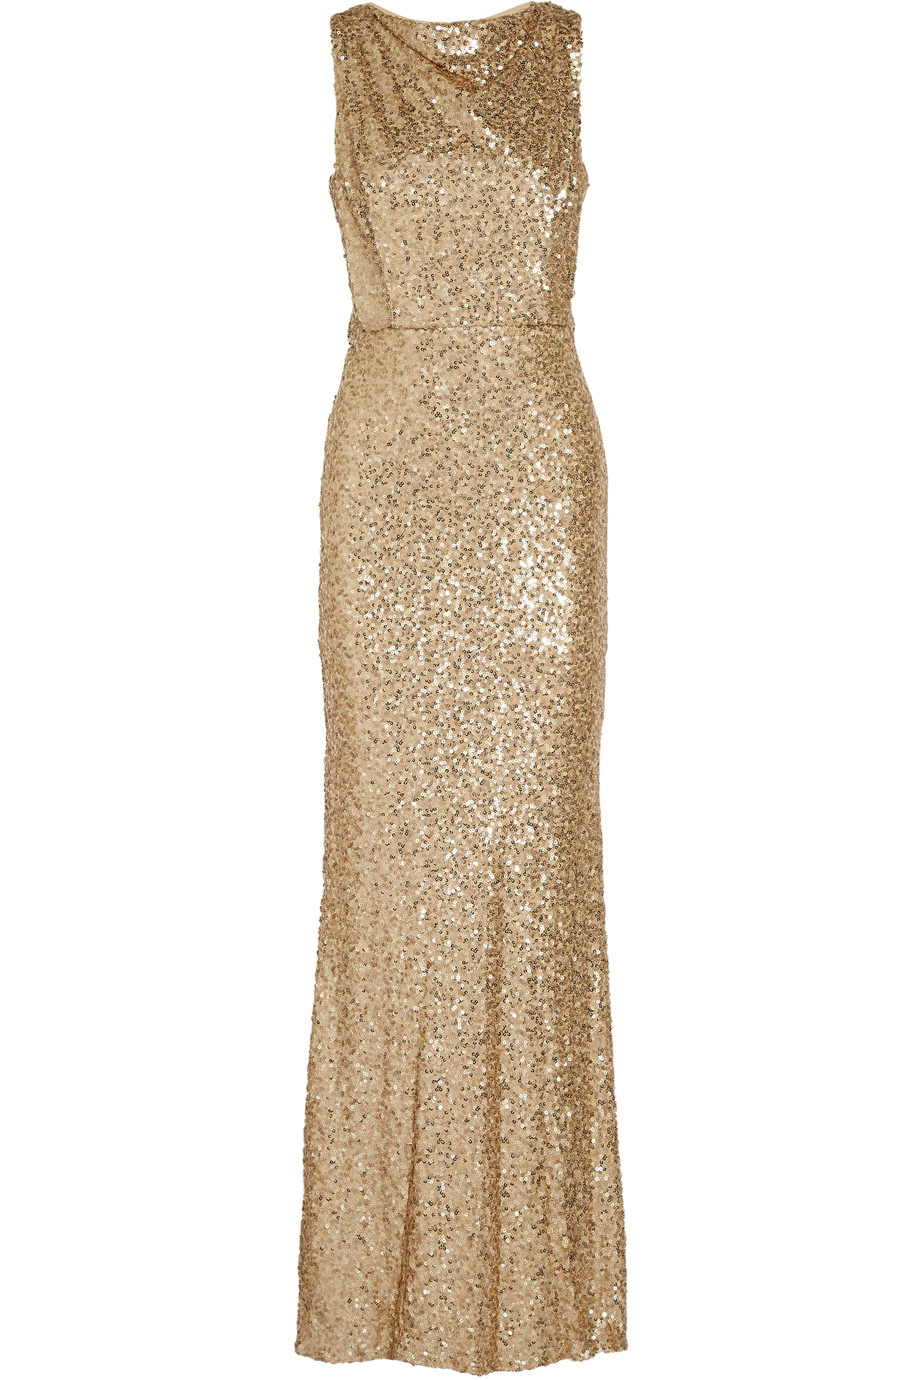 Badgley Mischka Draped Sequined Tulle Gown | ModeSens